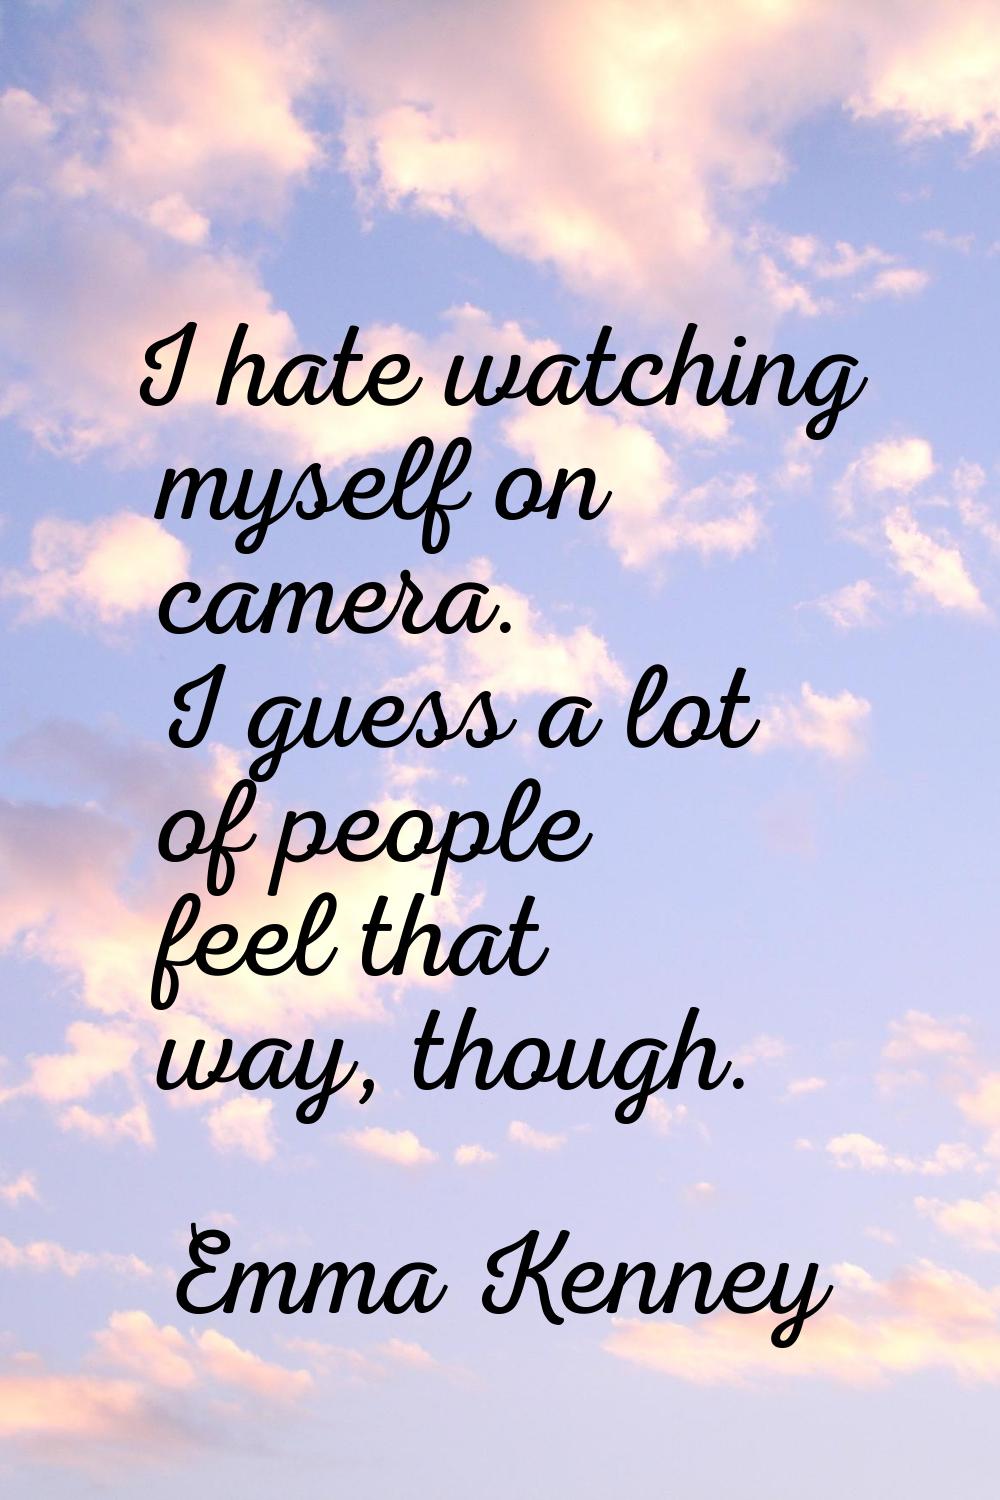 I hate watching myself on camera. I guess a lot of people feel that way, though.